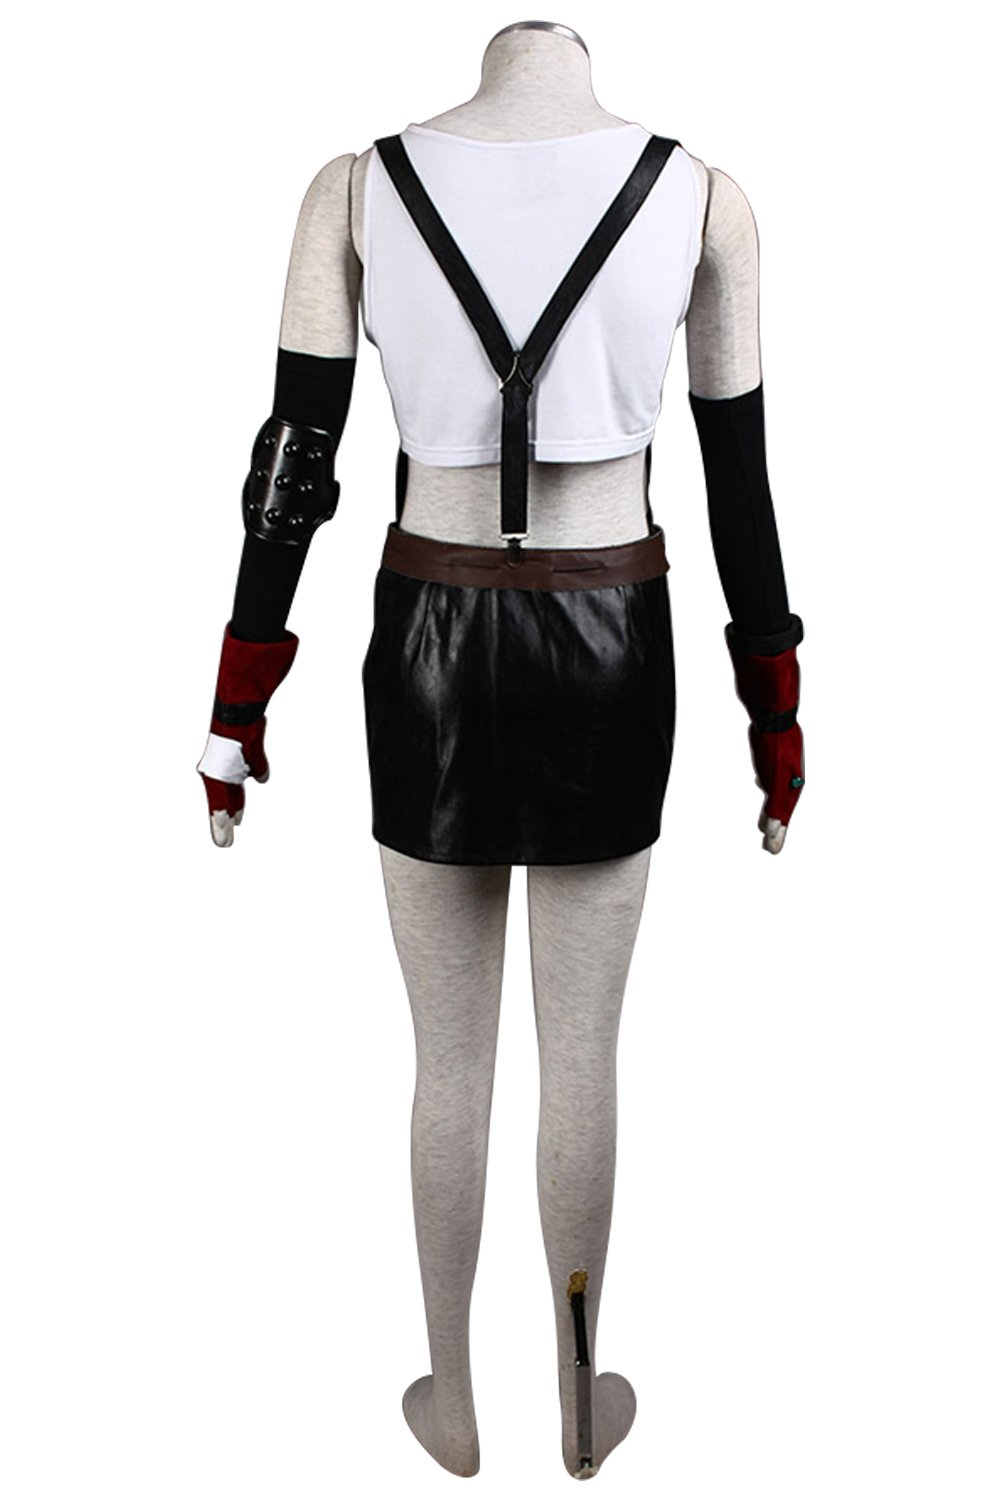 Final Fantasy VII FF7 Tifa Lockhart Outfit Cosplay Costume